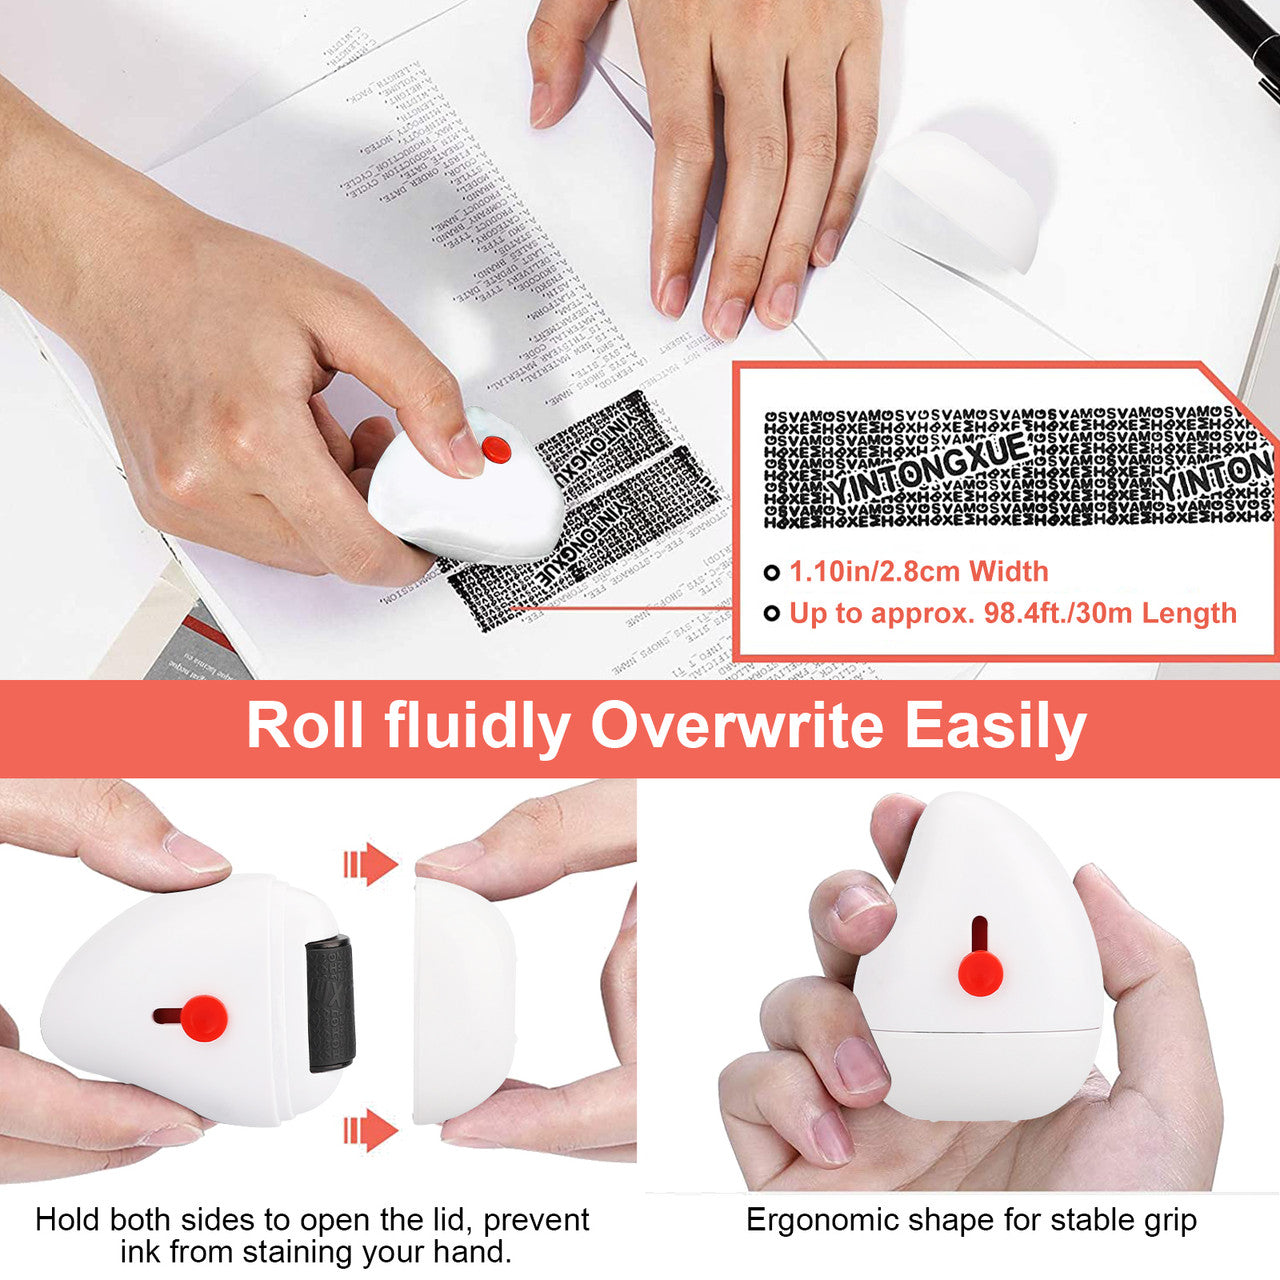 2-in-1 Identity Theft Protection Roller Stamp - with Box & Envelope Opener,Security Confidential Roller Stamps (White)